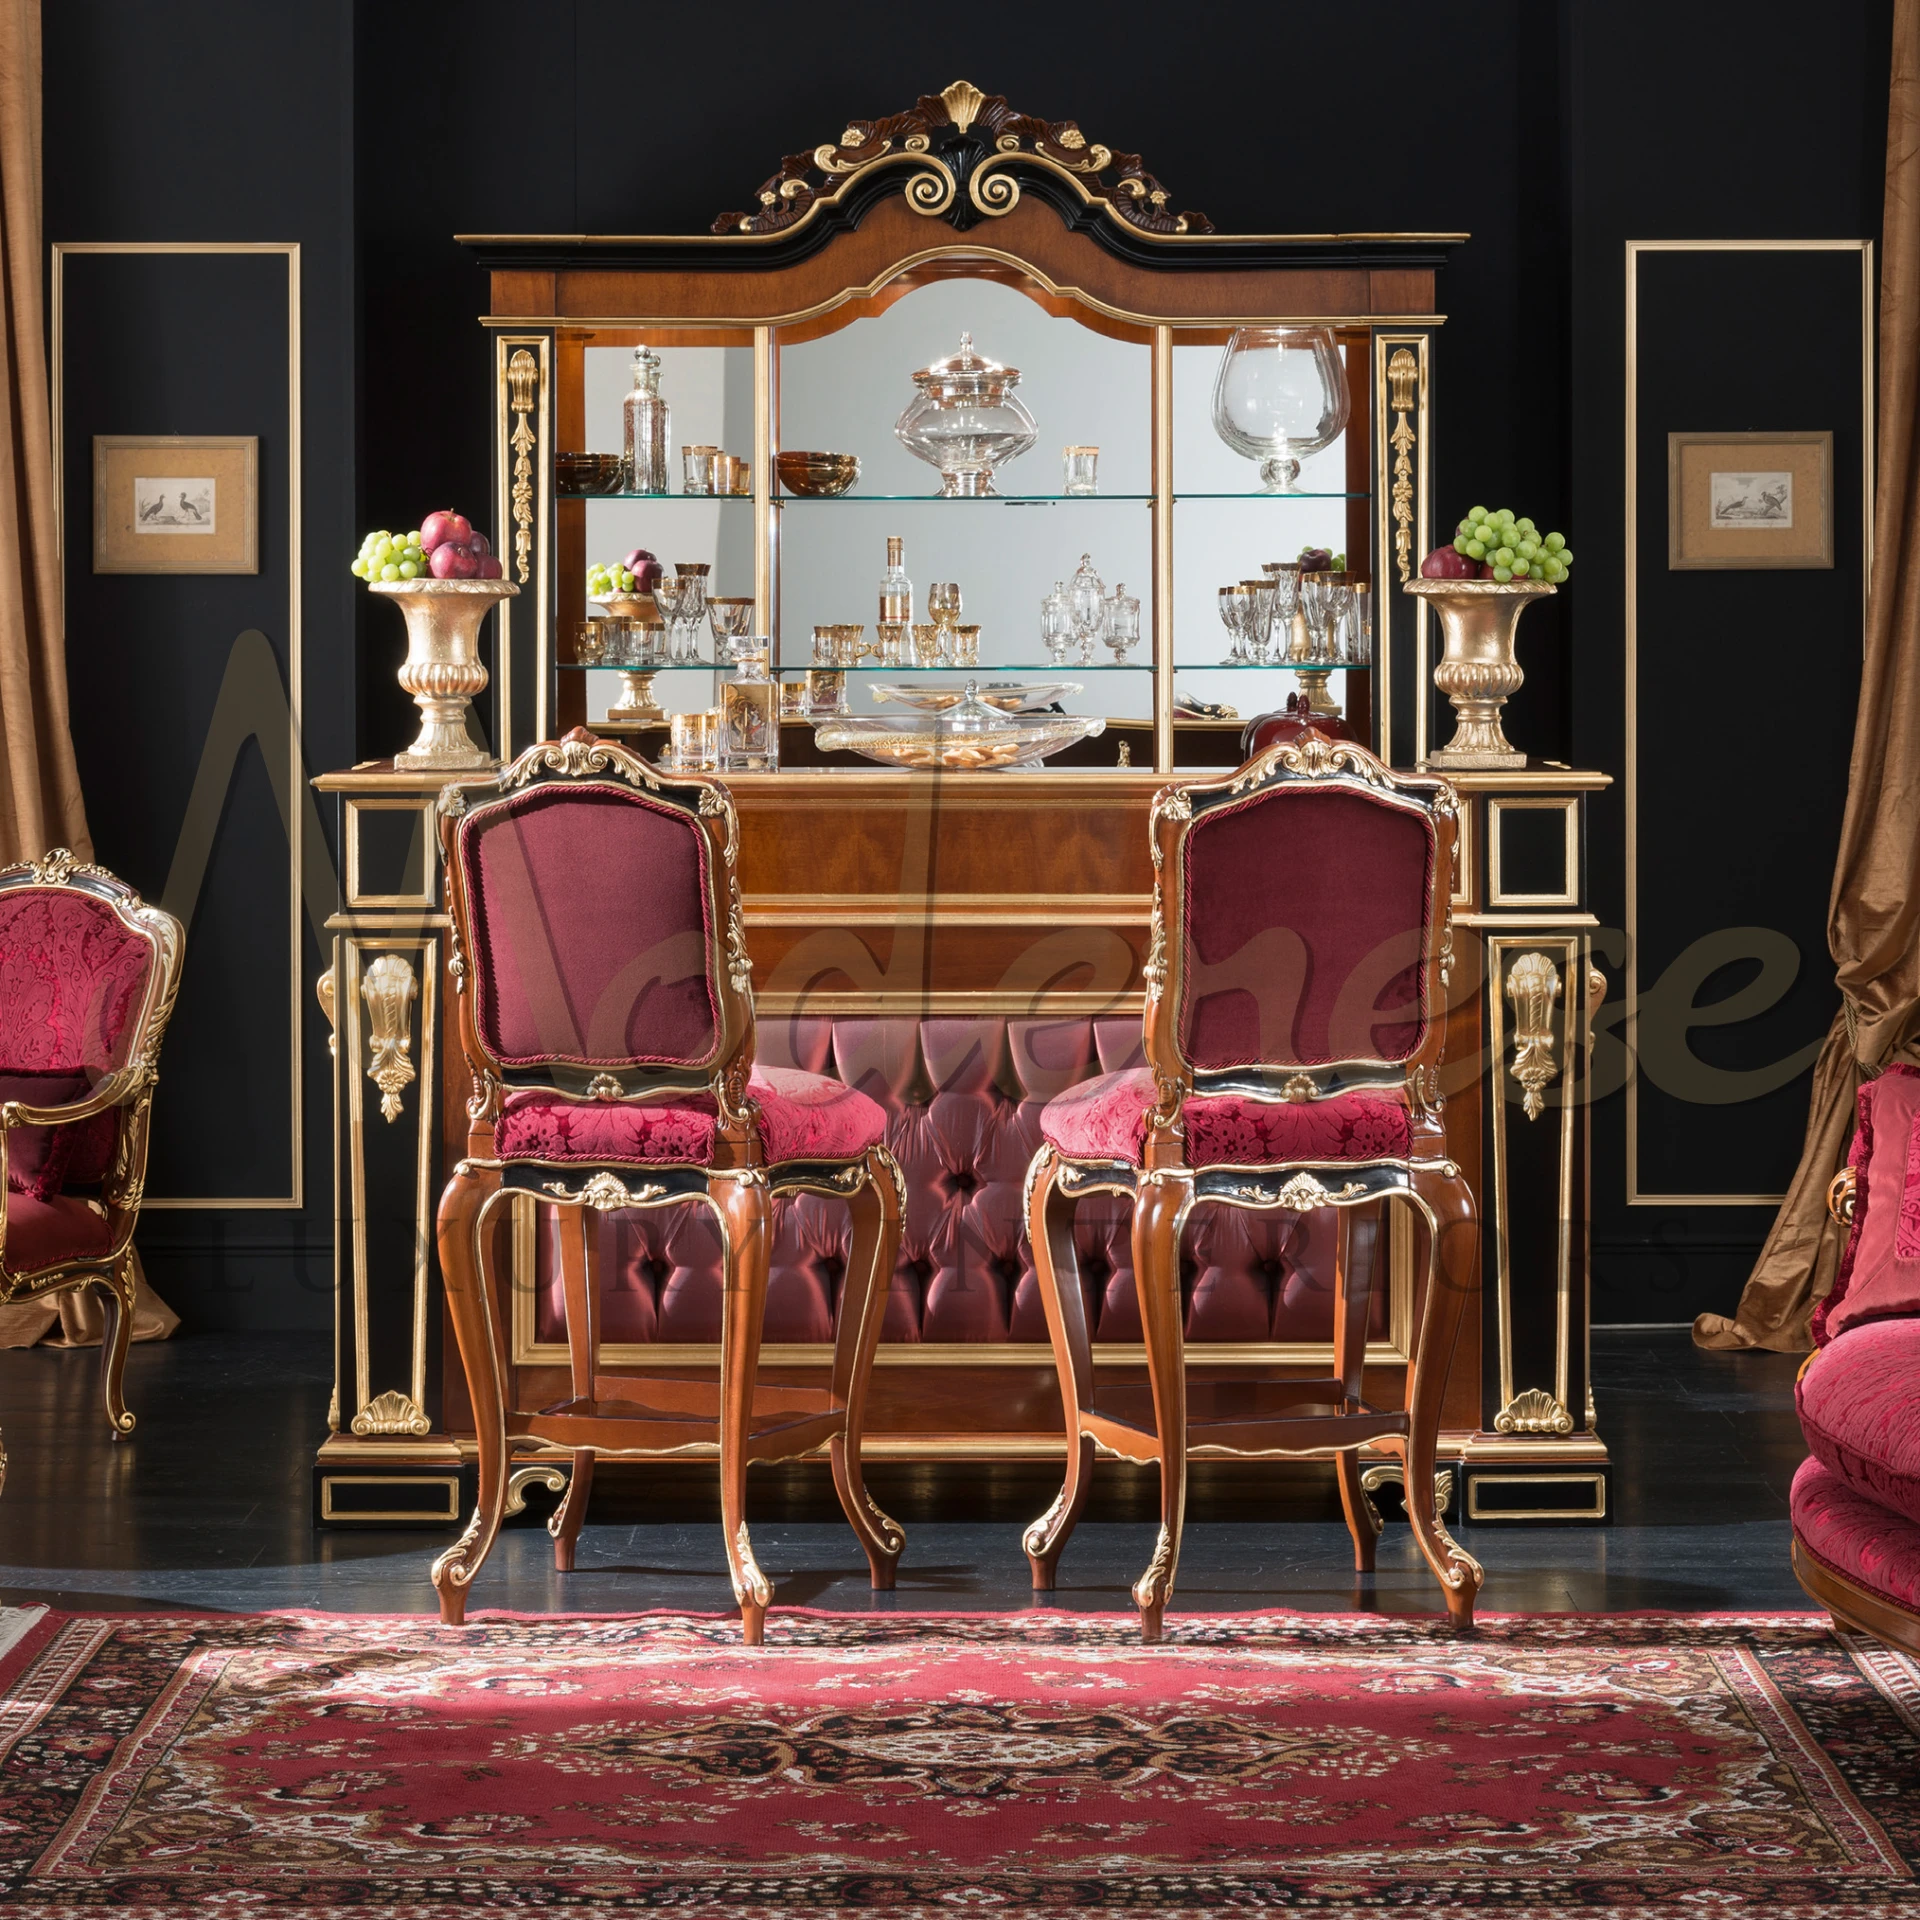 Embrace the essence of Italian luxury living with this cozy red bar interior. Featuring hand-decorated gold leaf details and a solid wooden structure.